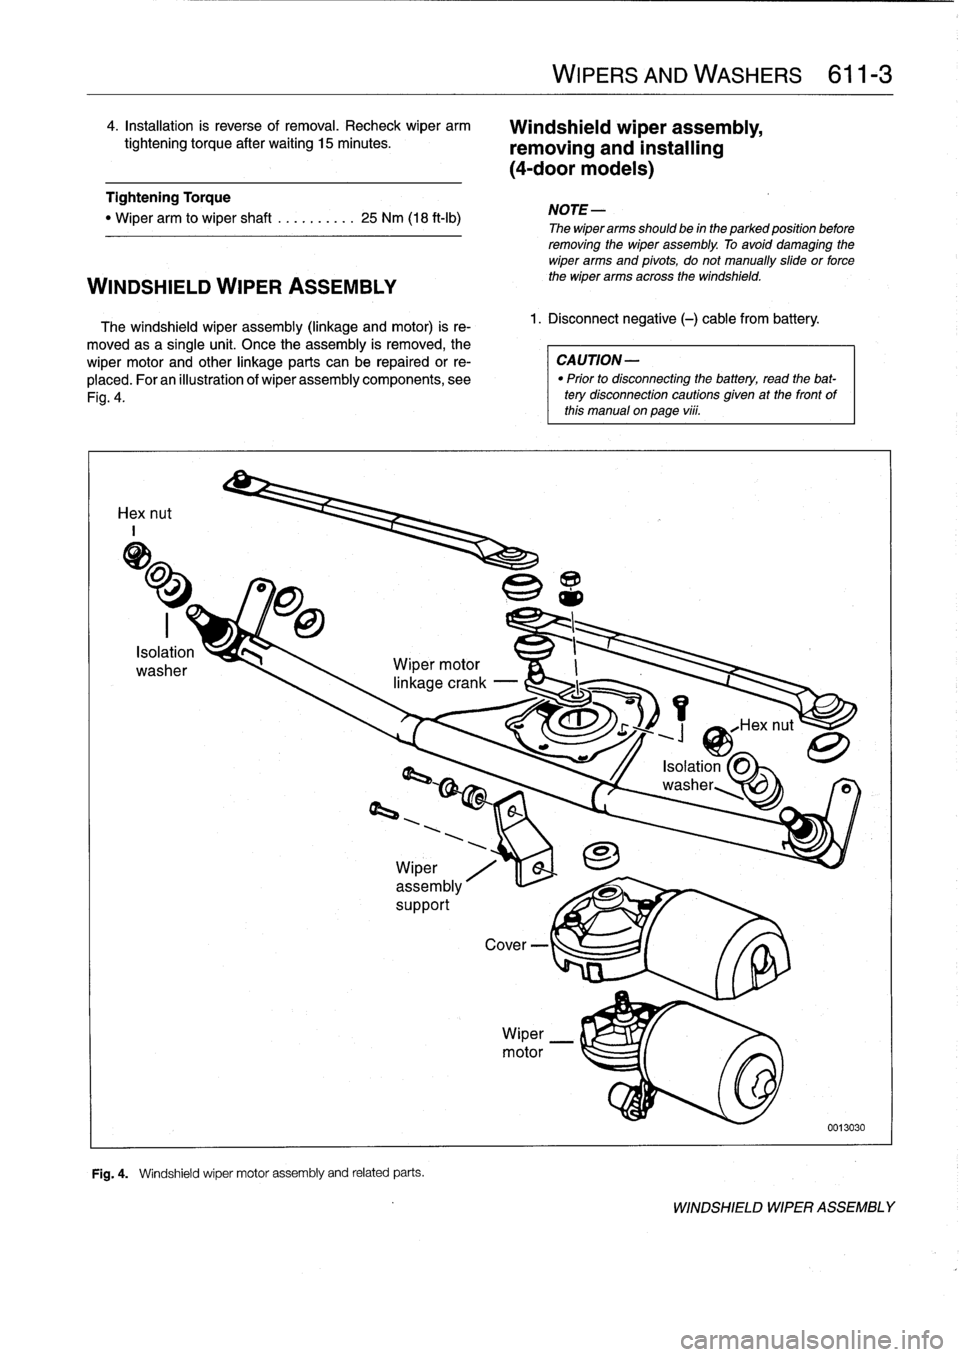 BMW M3 1994 E36 Workshop Manual 
4
.
Installation
is
reverse
of
removal
.
Recheck
wiper
arm

tightening
torque
after
waiting
15minutes
.

Tightening
Torque

"
Wiper
arm
to
wiper
shaft
..........
25
Nm
(18
ft-Ib)

WINDSHIELD
WIPER
AS